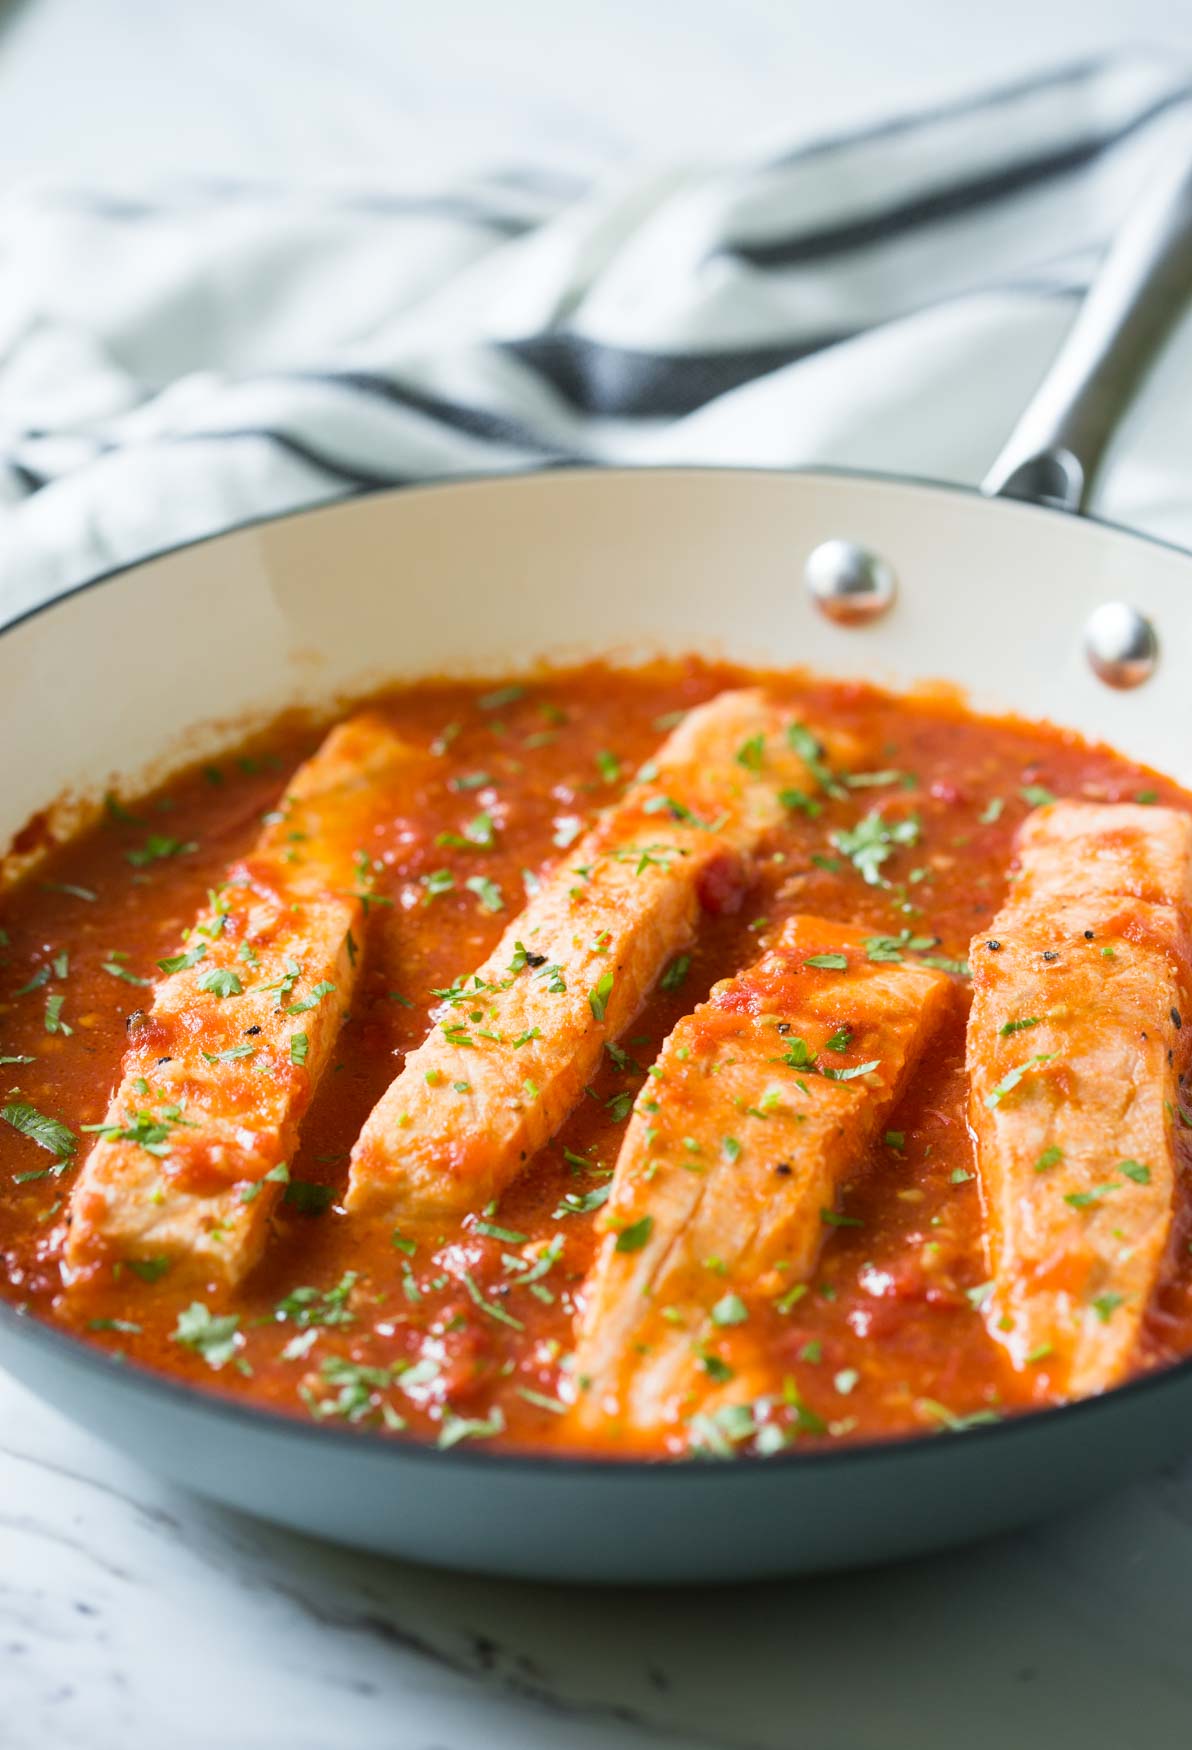 Salmon in Tomato Sauce - Under 30 min quick and easy weeknight meal. Serve with pasta, grits or plain rice.